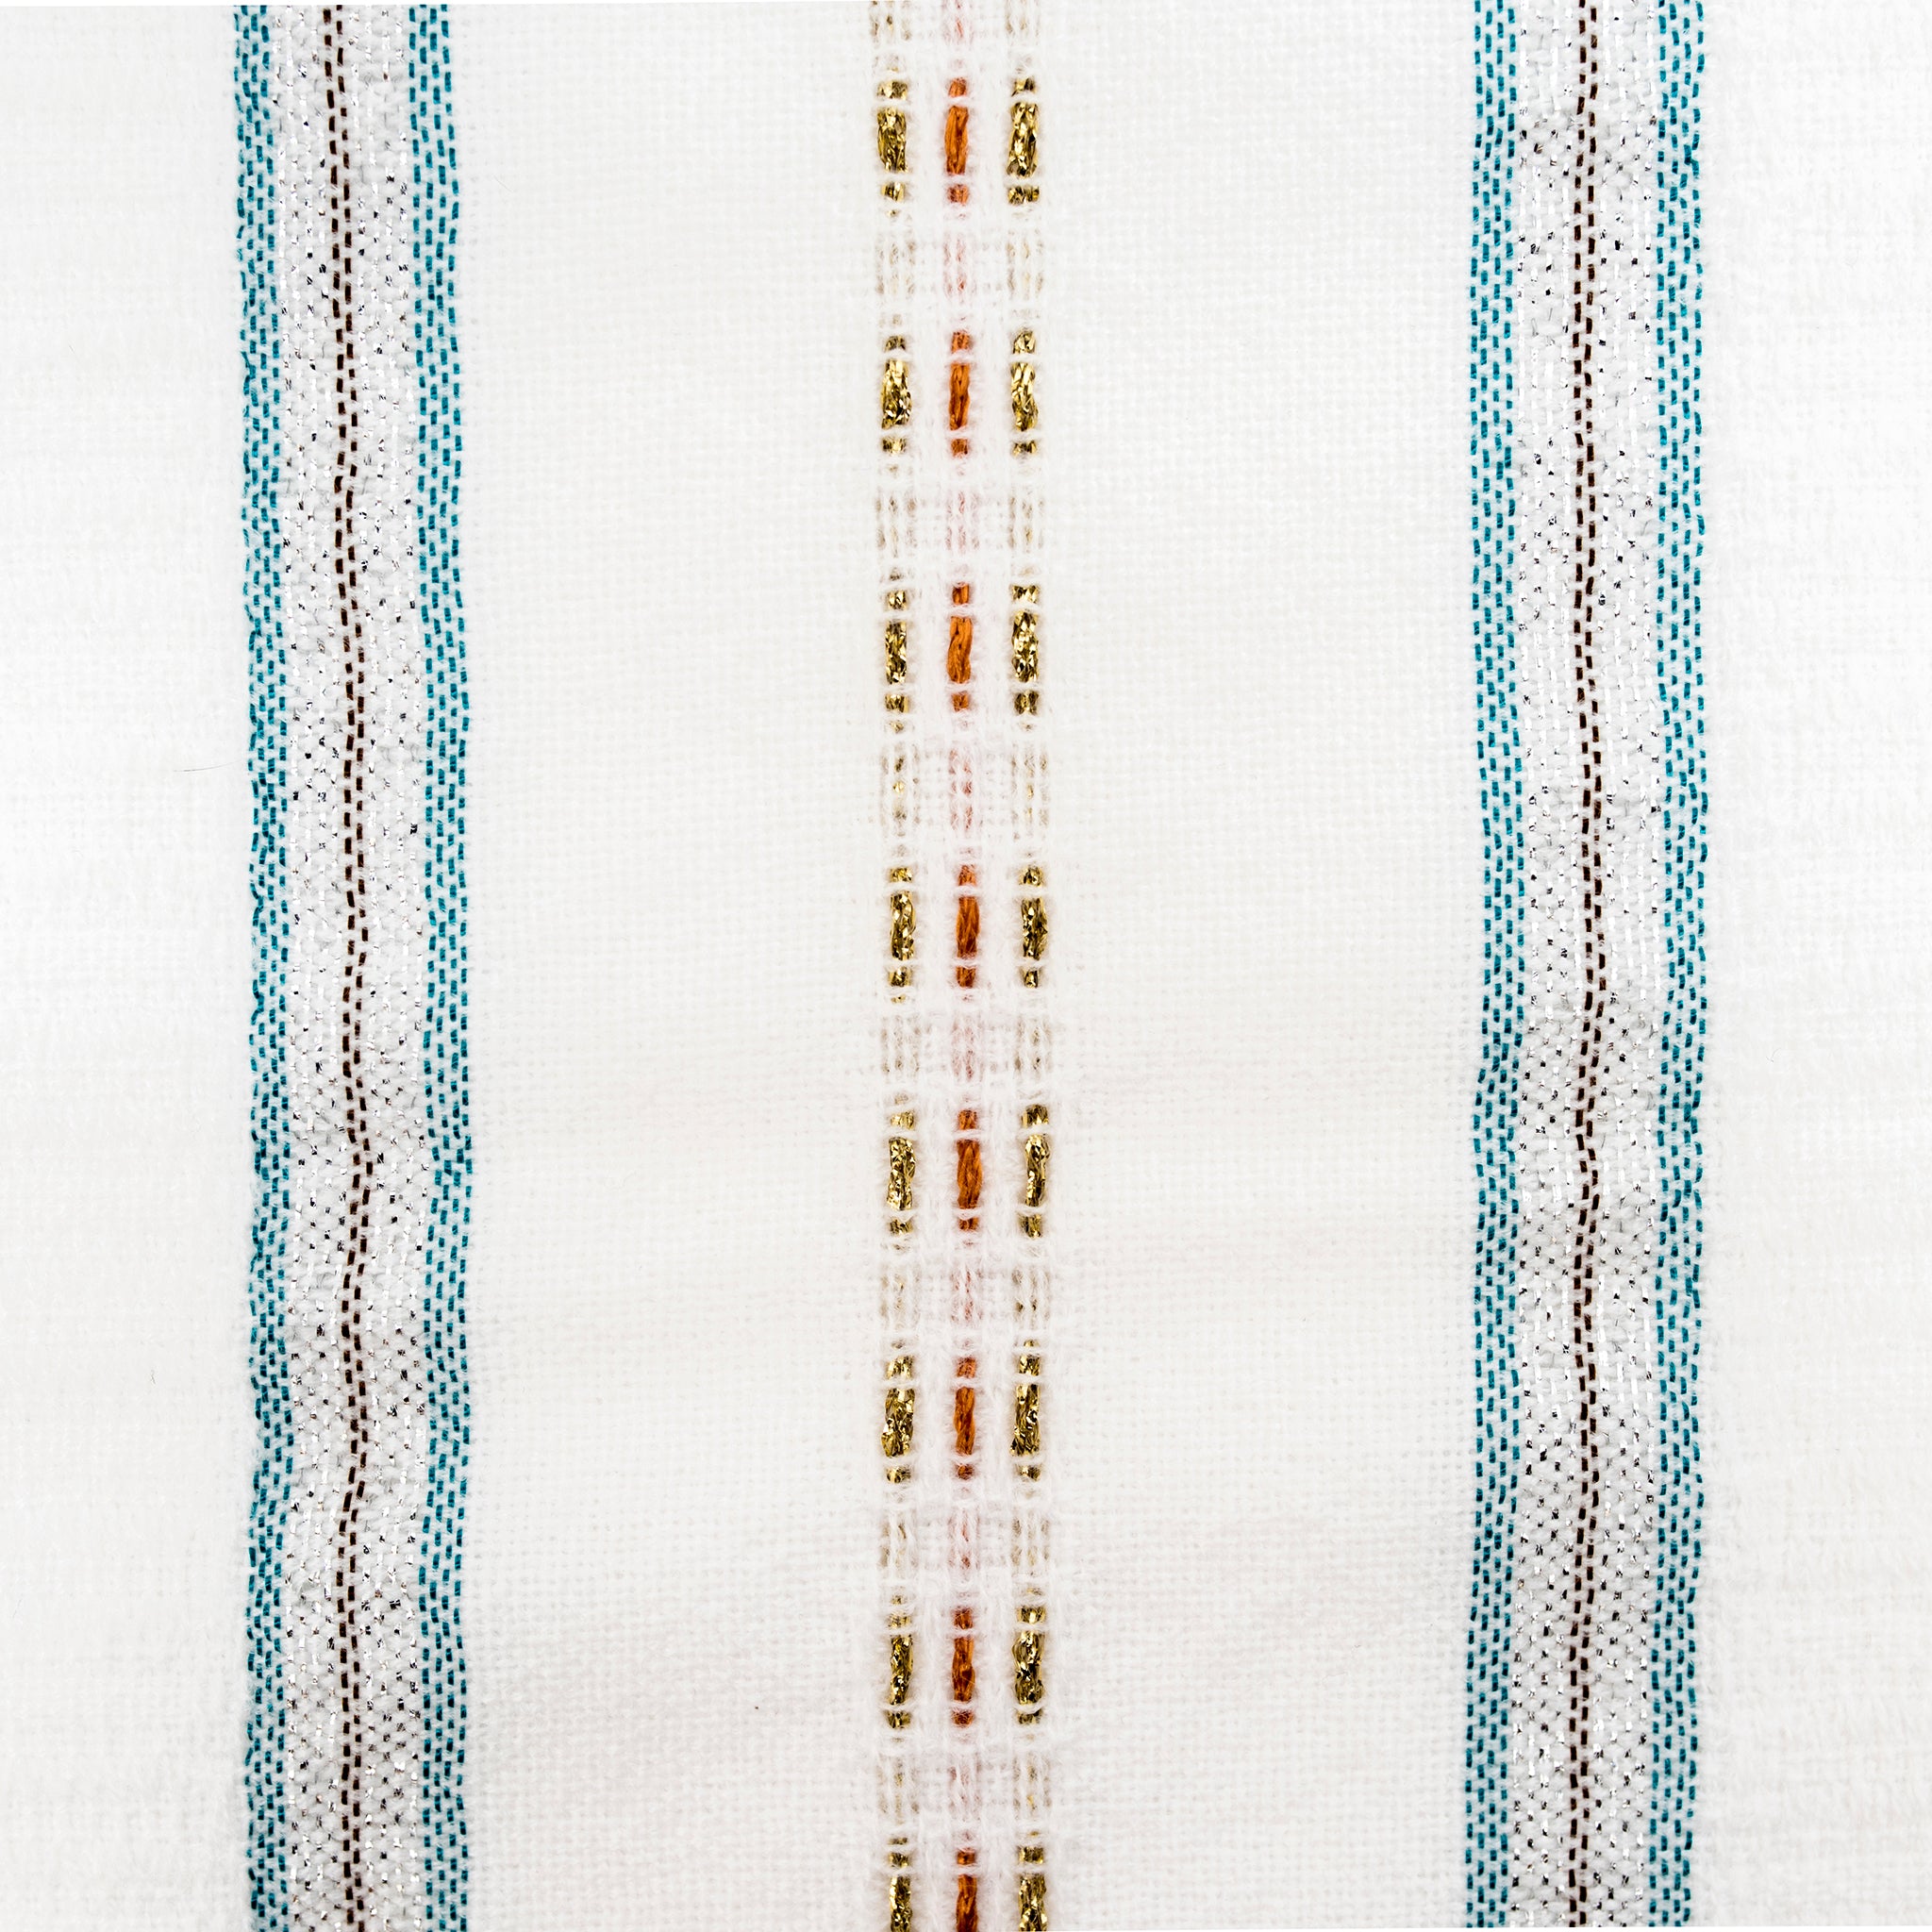 Tablecloths - Gabrieli Design - Turquoise, Orange, Black, Silver and Gold on White